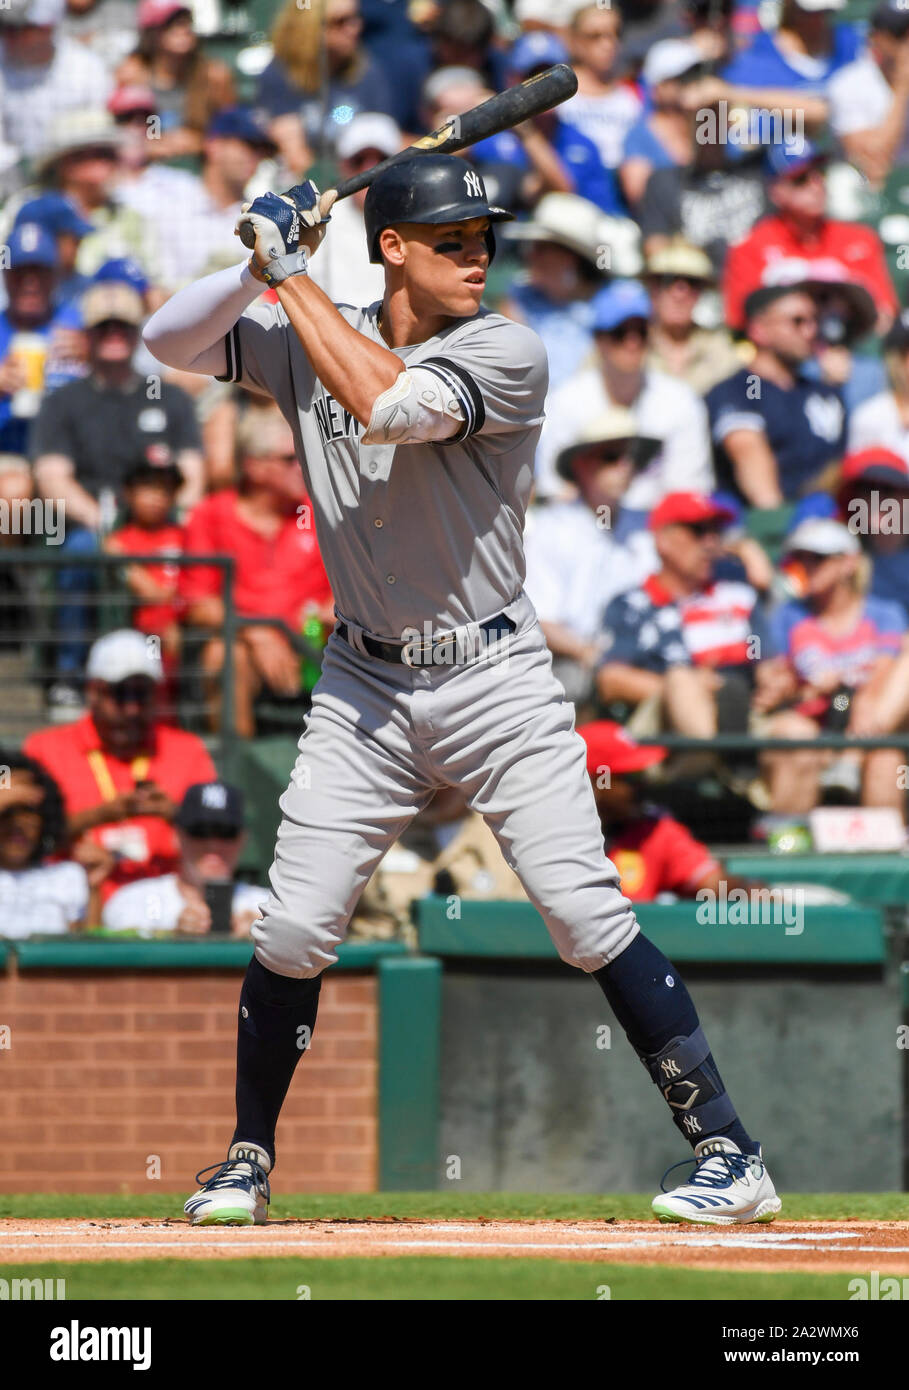 September 29, 2019: New York Yankees right fielder Aaron Judge #99 at bat  during the final Major League Baseball game held at Globe Life Park between  the New York Yankees and the